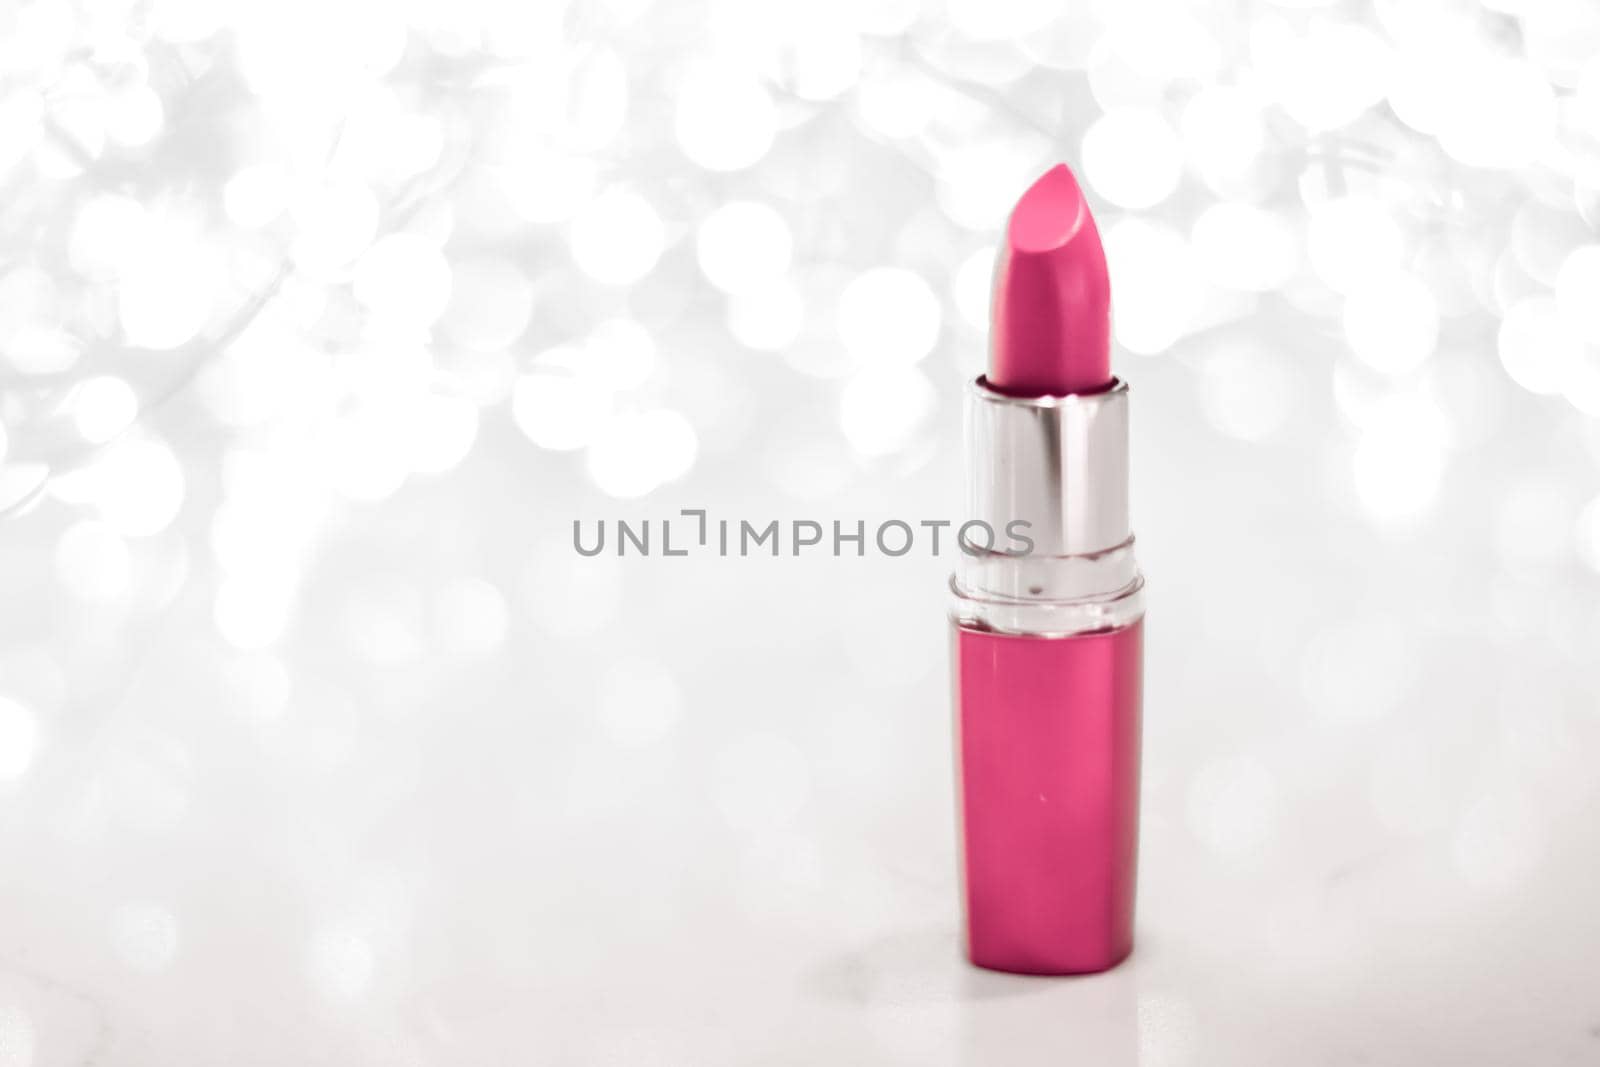 Cosmetic branding, sale and glamour concept - Pink lipstick on silver Christmas, New Years and Valentines Day holiday glitter background, make-up and cosmetics product for luxury beauty brand